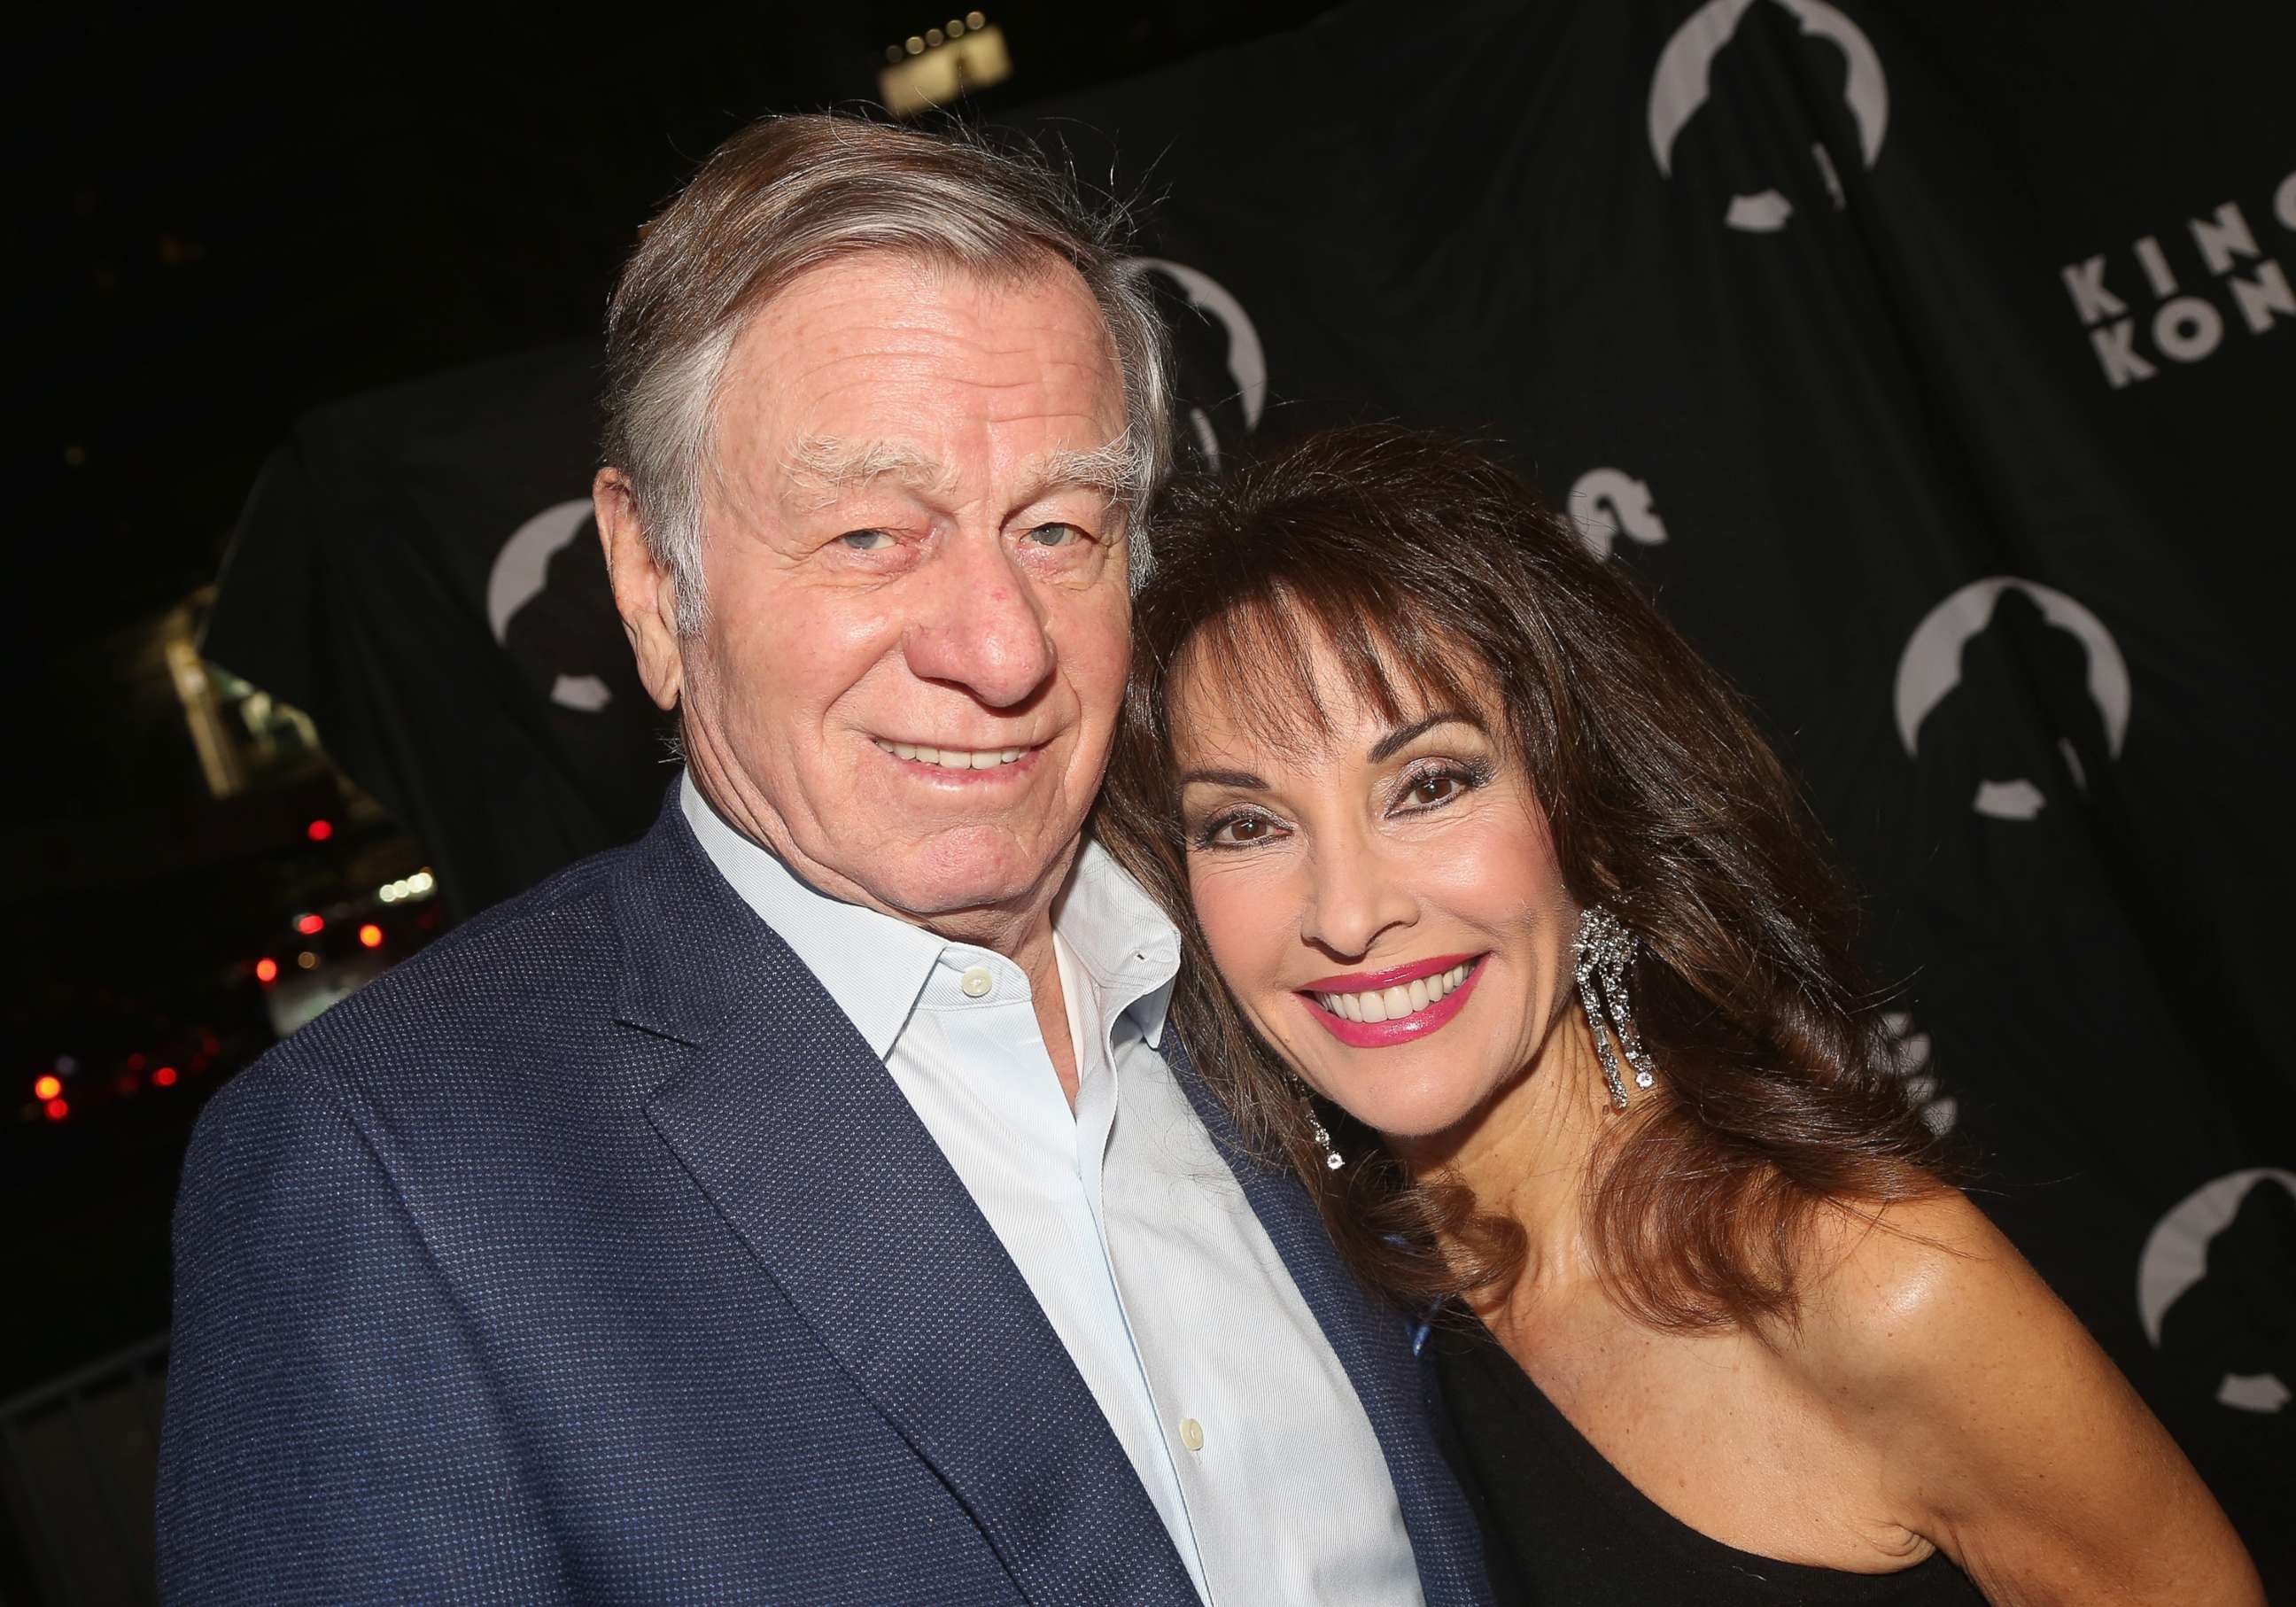 PHOTO: Helmut Huber and Susan Lucci pose at the opening night of "King Kong" on Broadway  on Nov. 8, 2018 in New York City.